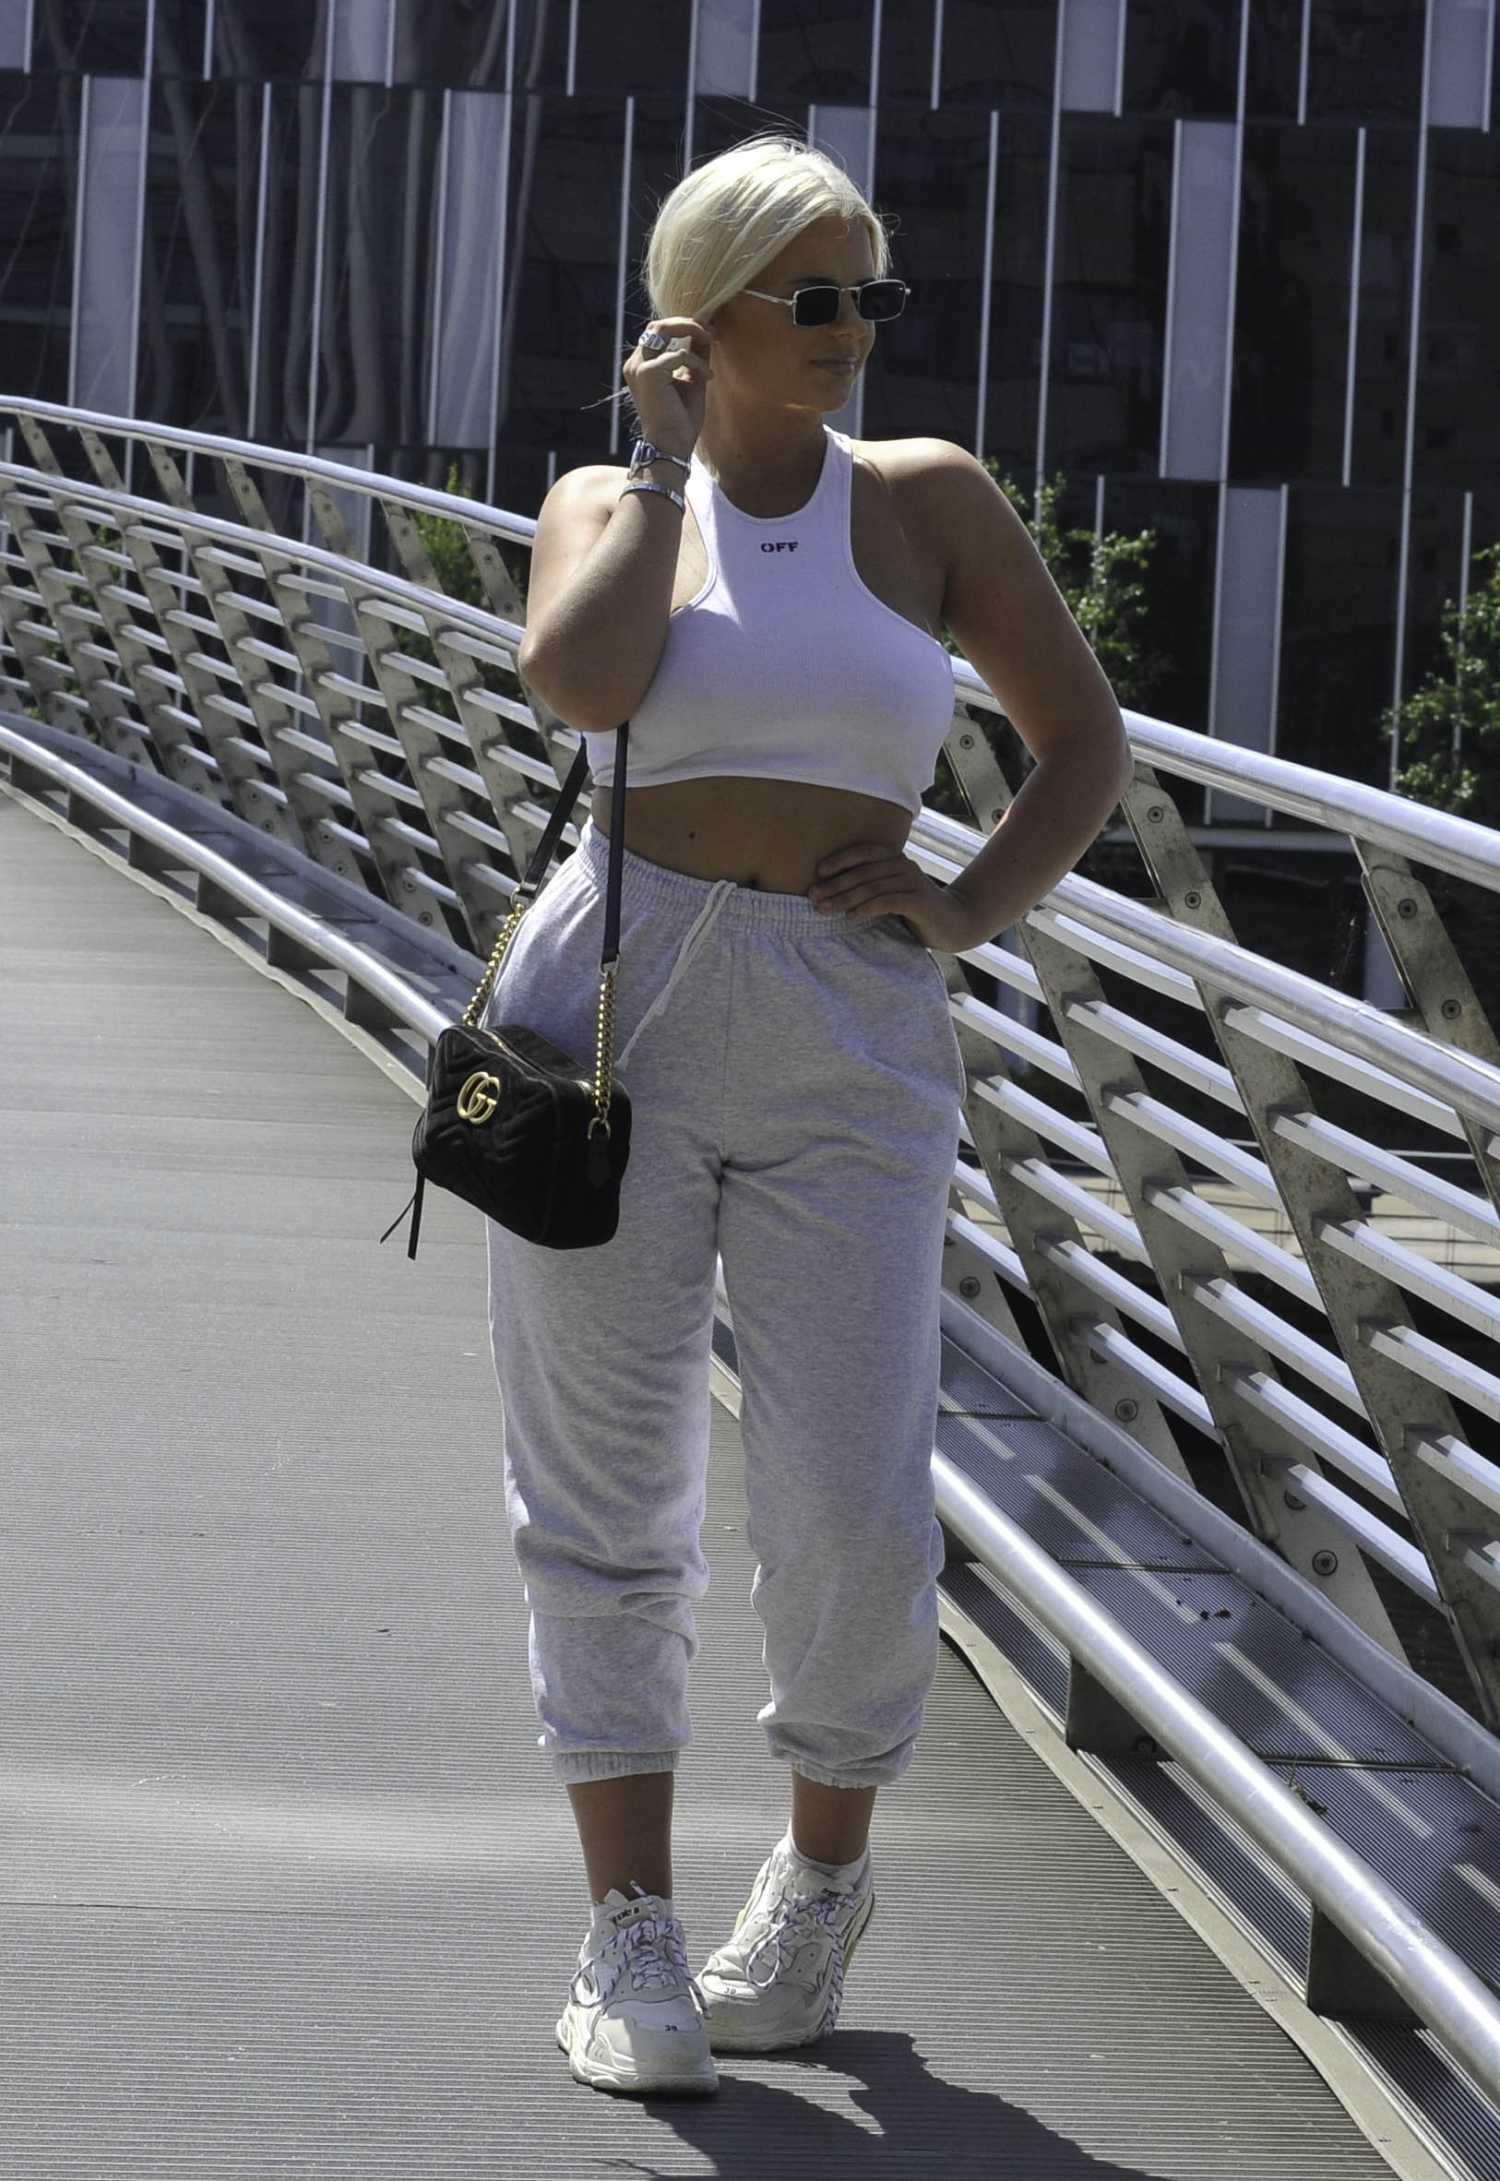 Apollonia Llewellyn in a White Sports Bra Was Seen Out in Manchester